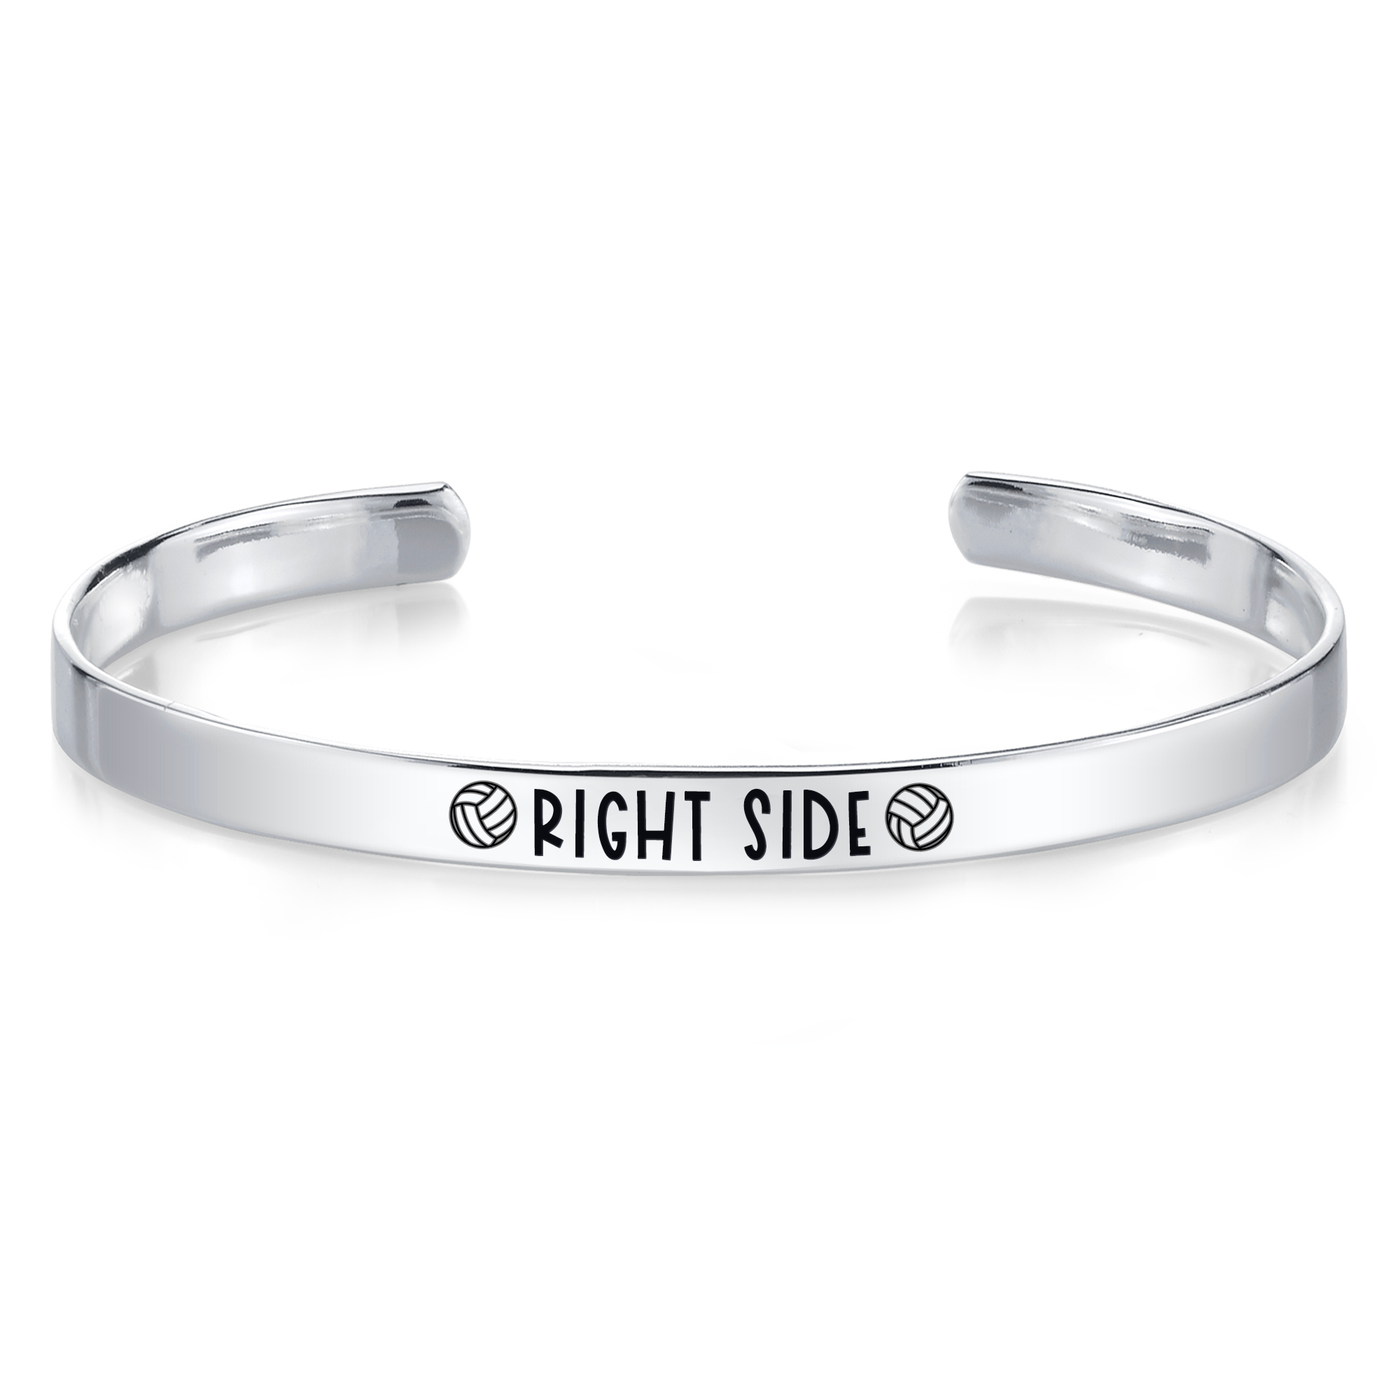 Right Side/Opposite Hitter - Volleyball Position Engraved Bangle